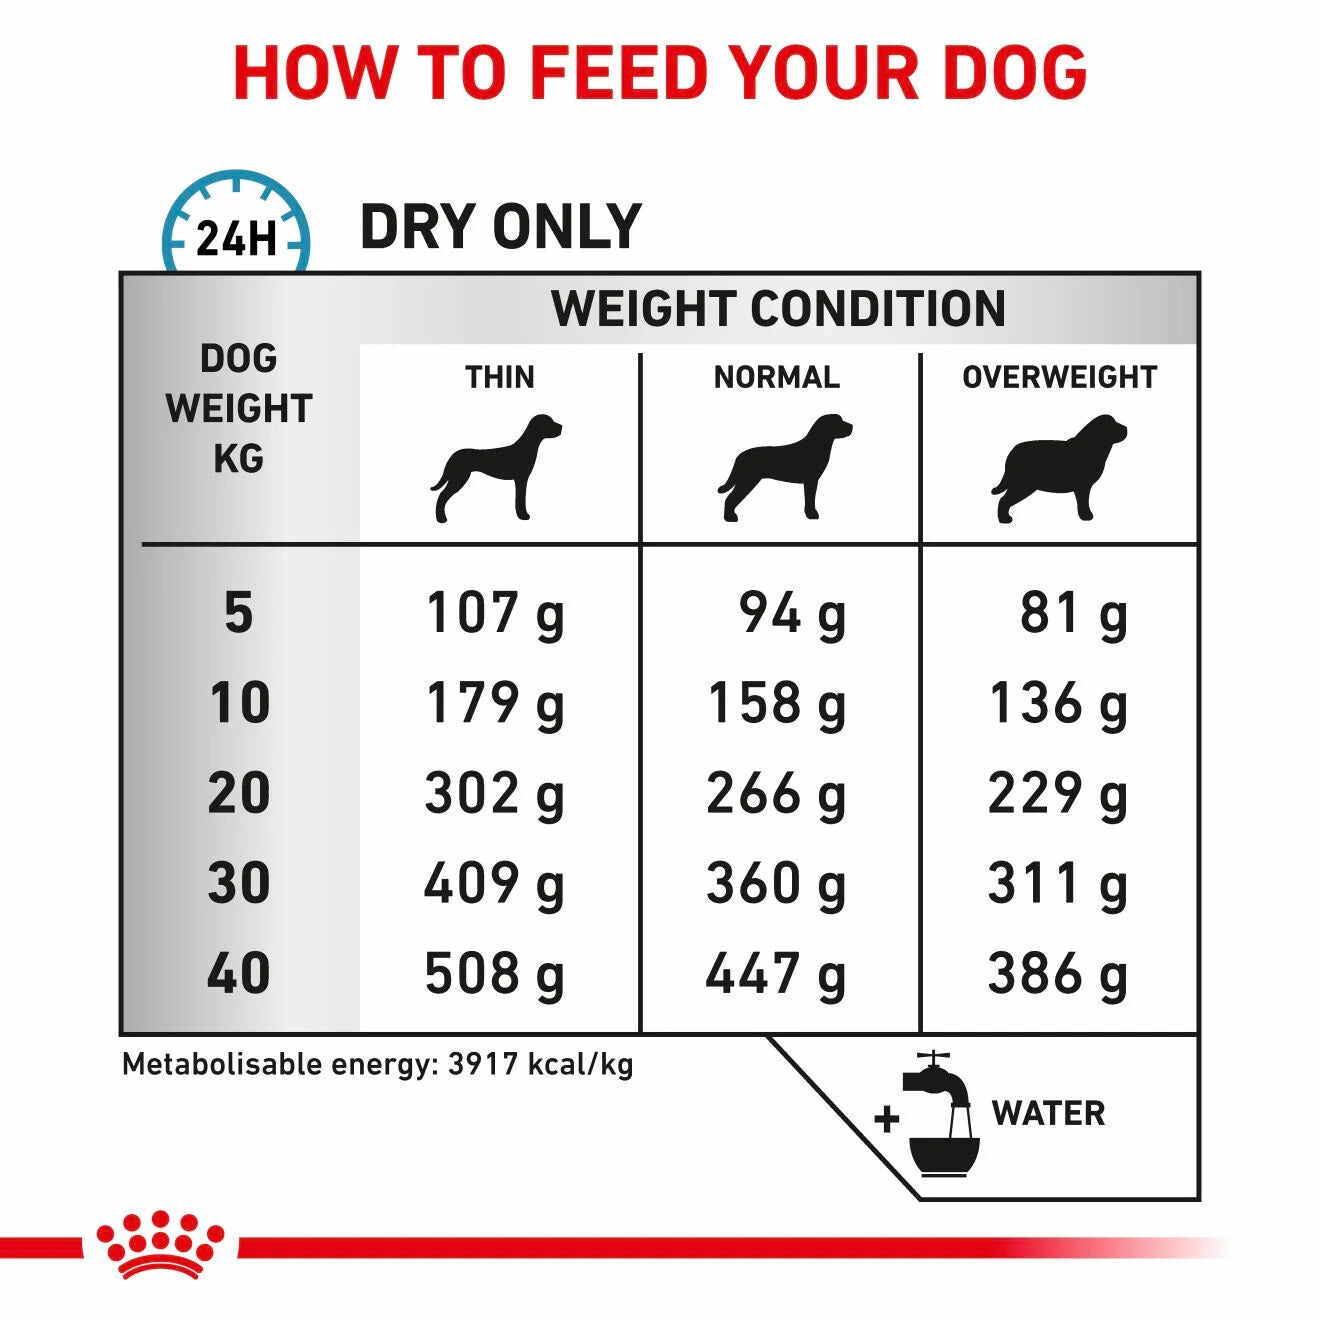 Royal Canin - Canine Anallergenic